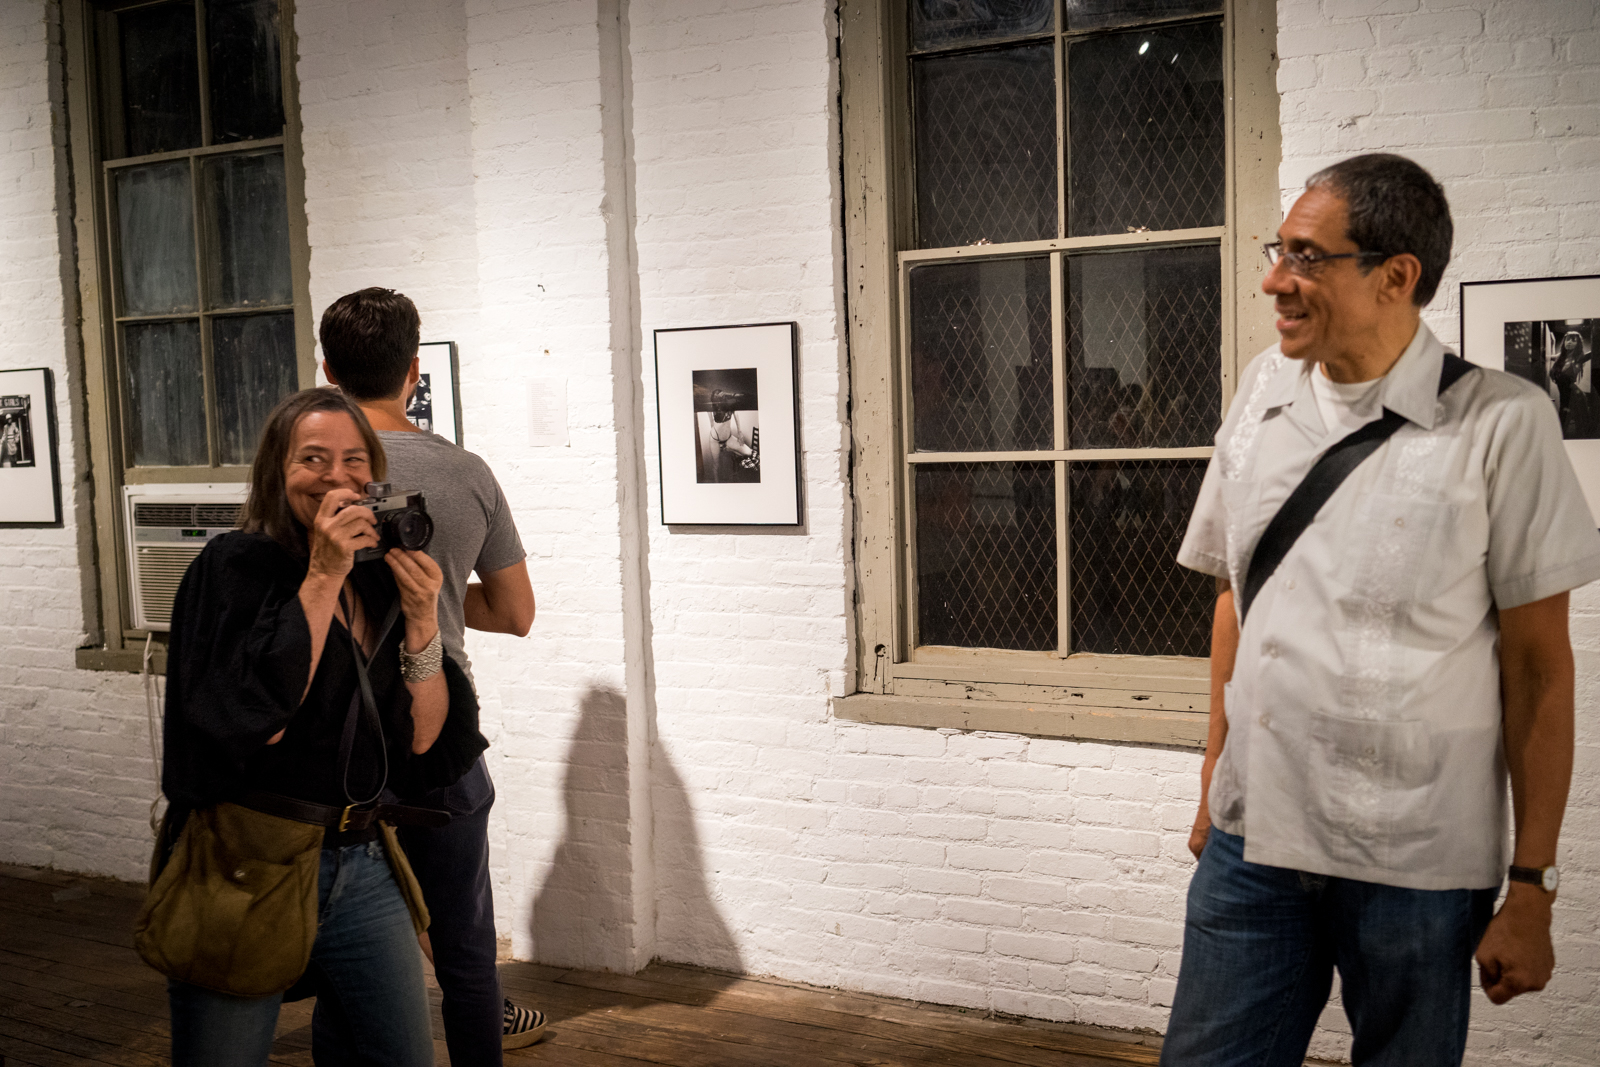  Favorite photographers Donna Ferrato &amp; Joseph Rodriguez- at “Rear Windows” featuring  Girl Under Glass  at the Invisible Dog Gallery, Brooklyn 2015 